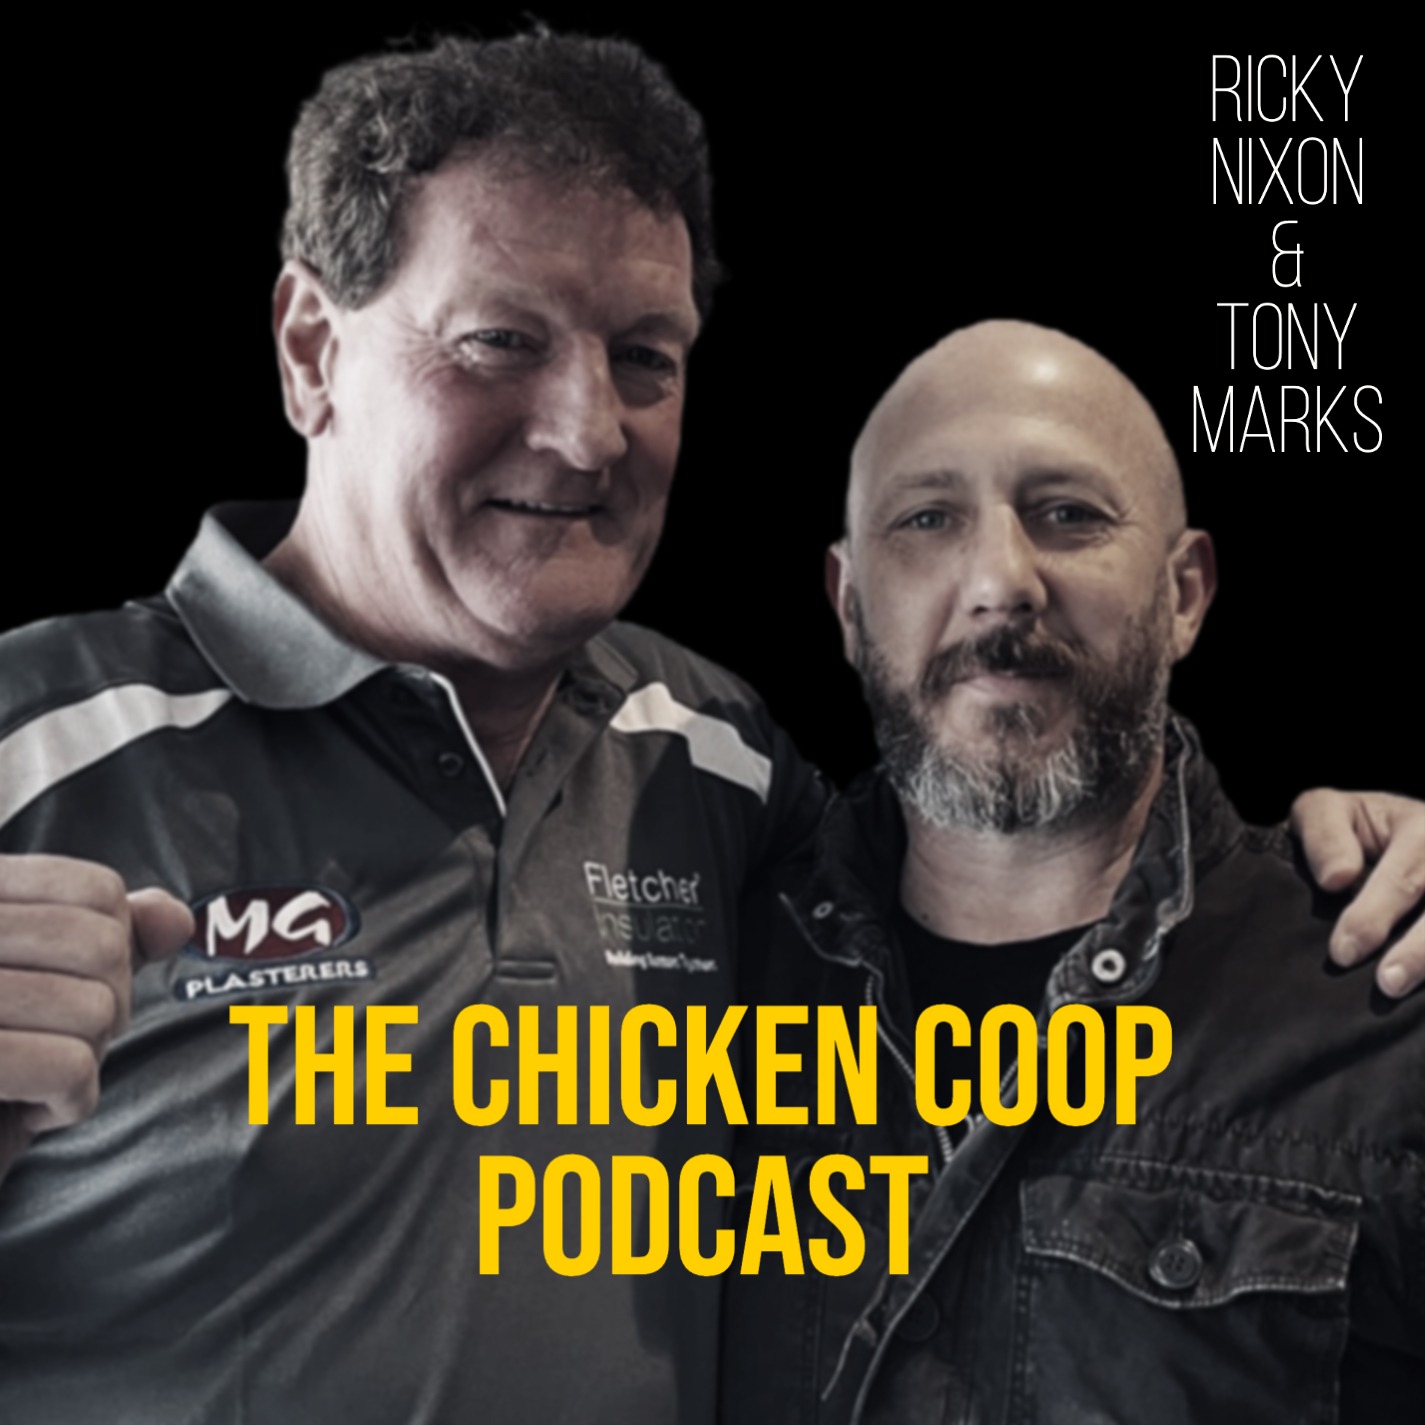 The Chicken Coop with Ricky Nixon & Tony Marks - Episode 4